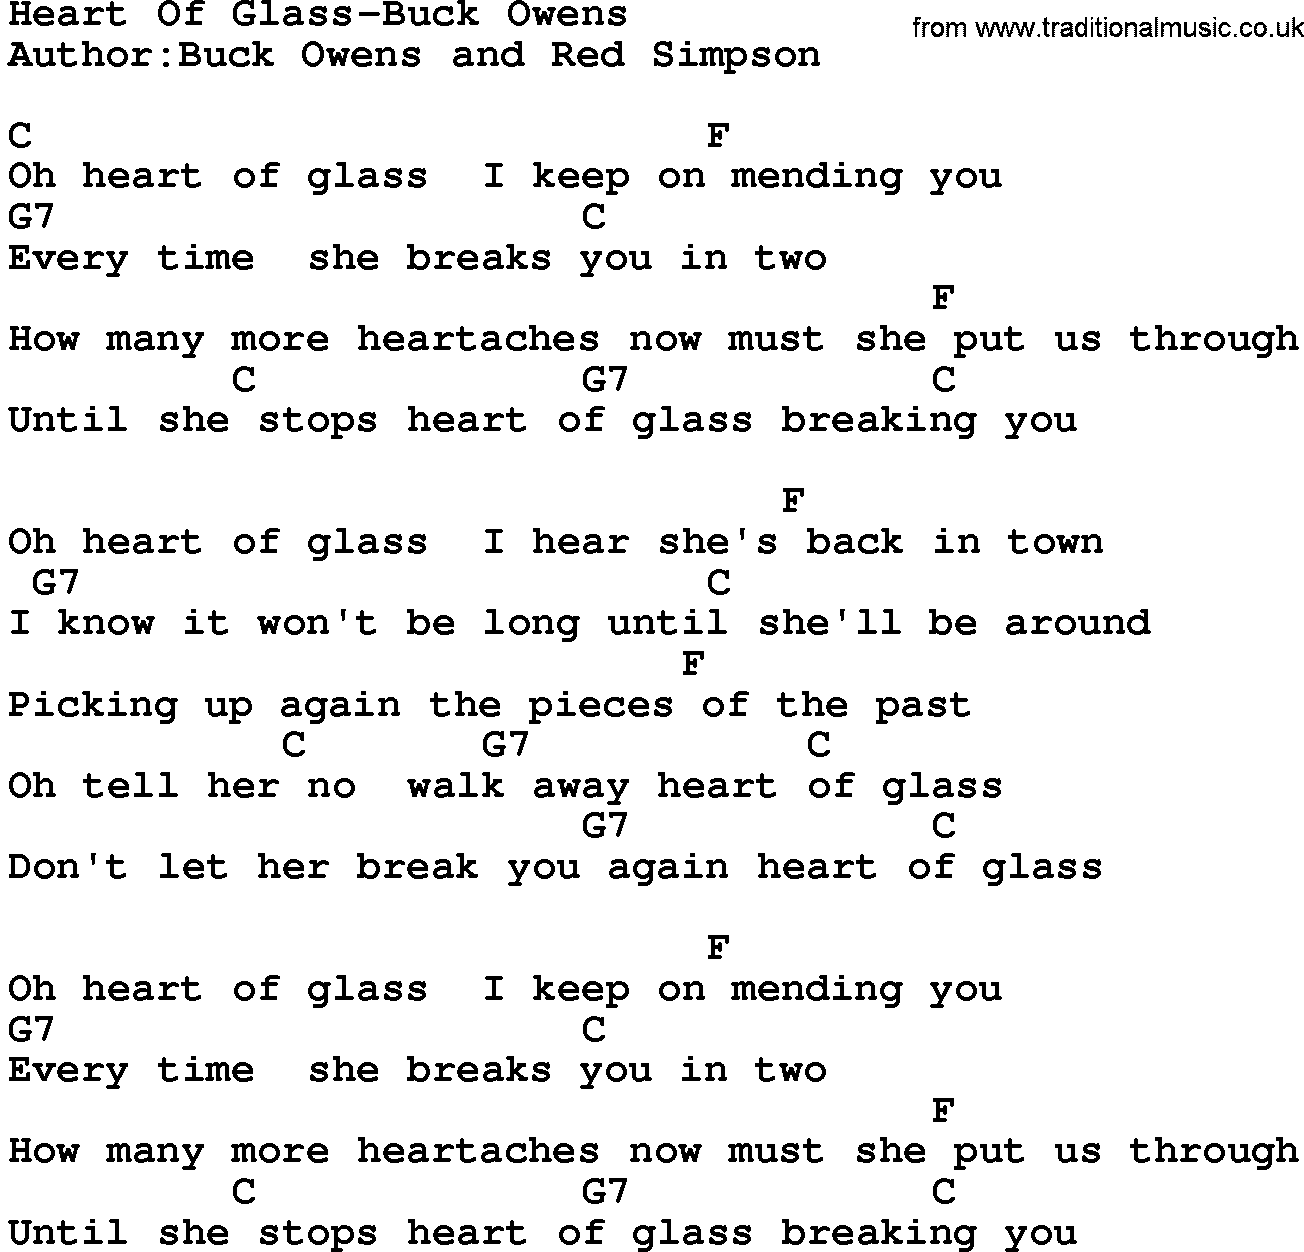 Country music song: Heart Of Glass-Buck Owens lyrics and chords